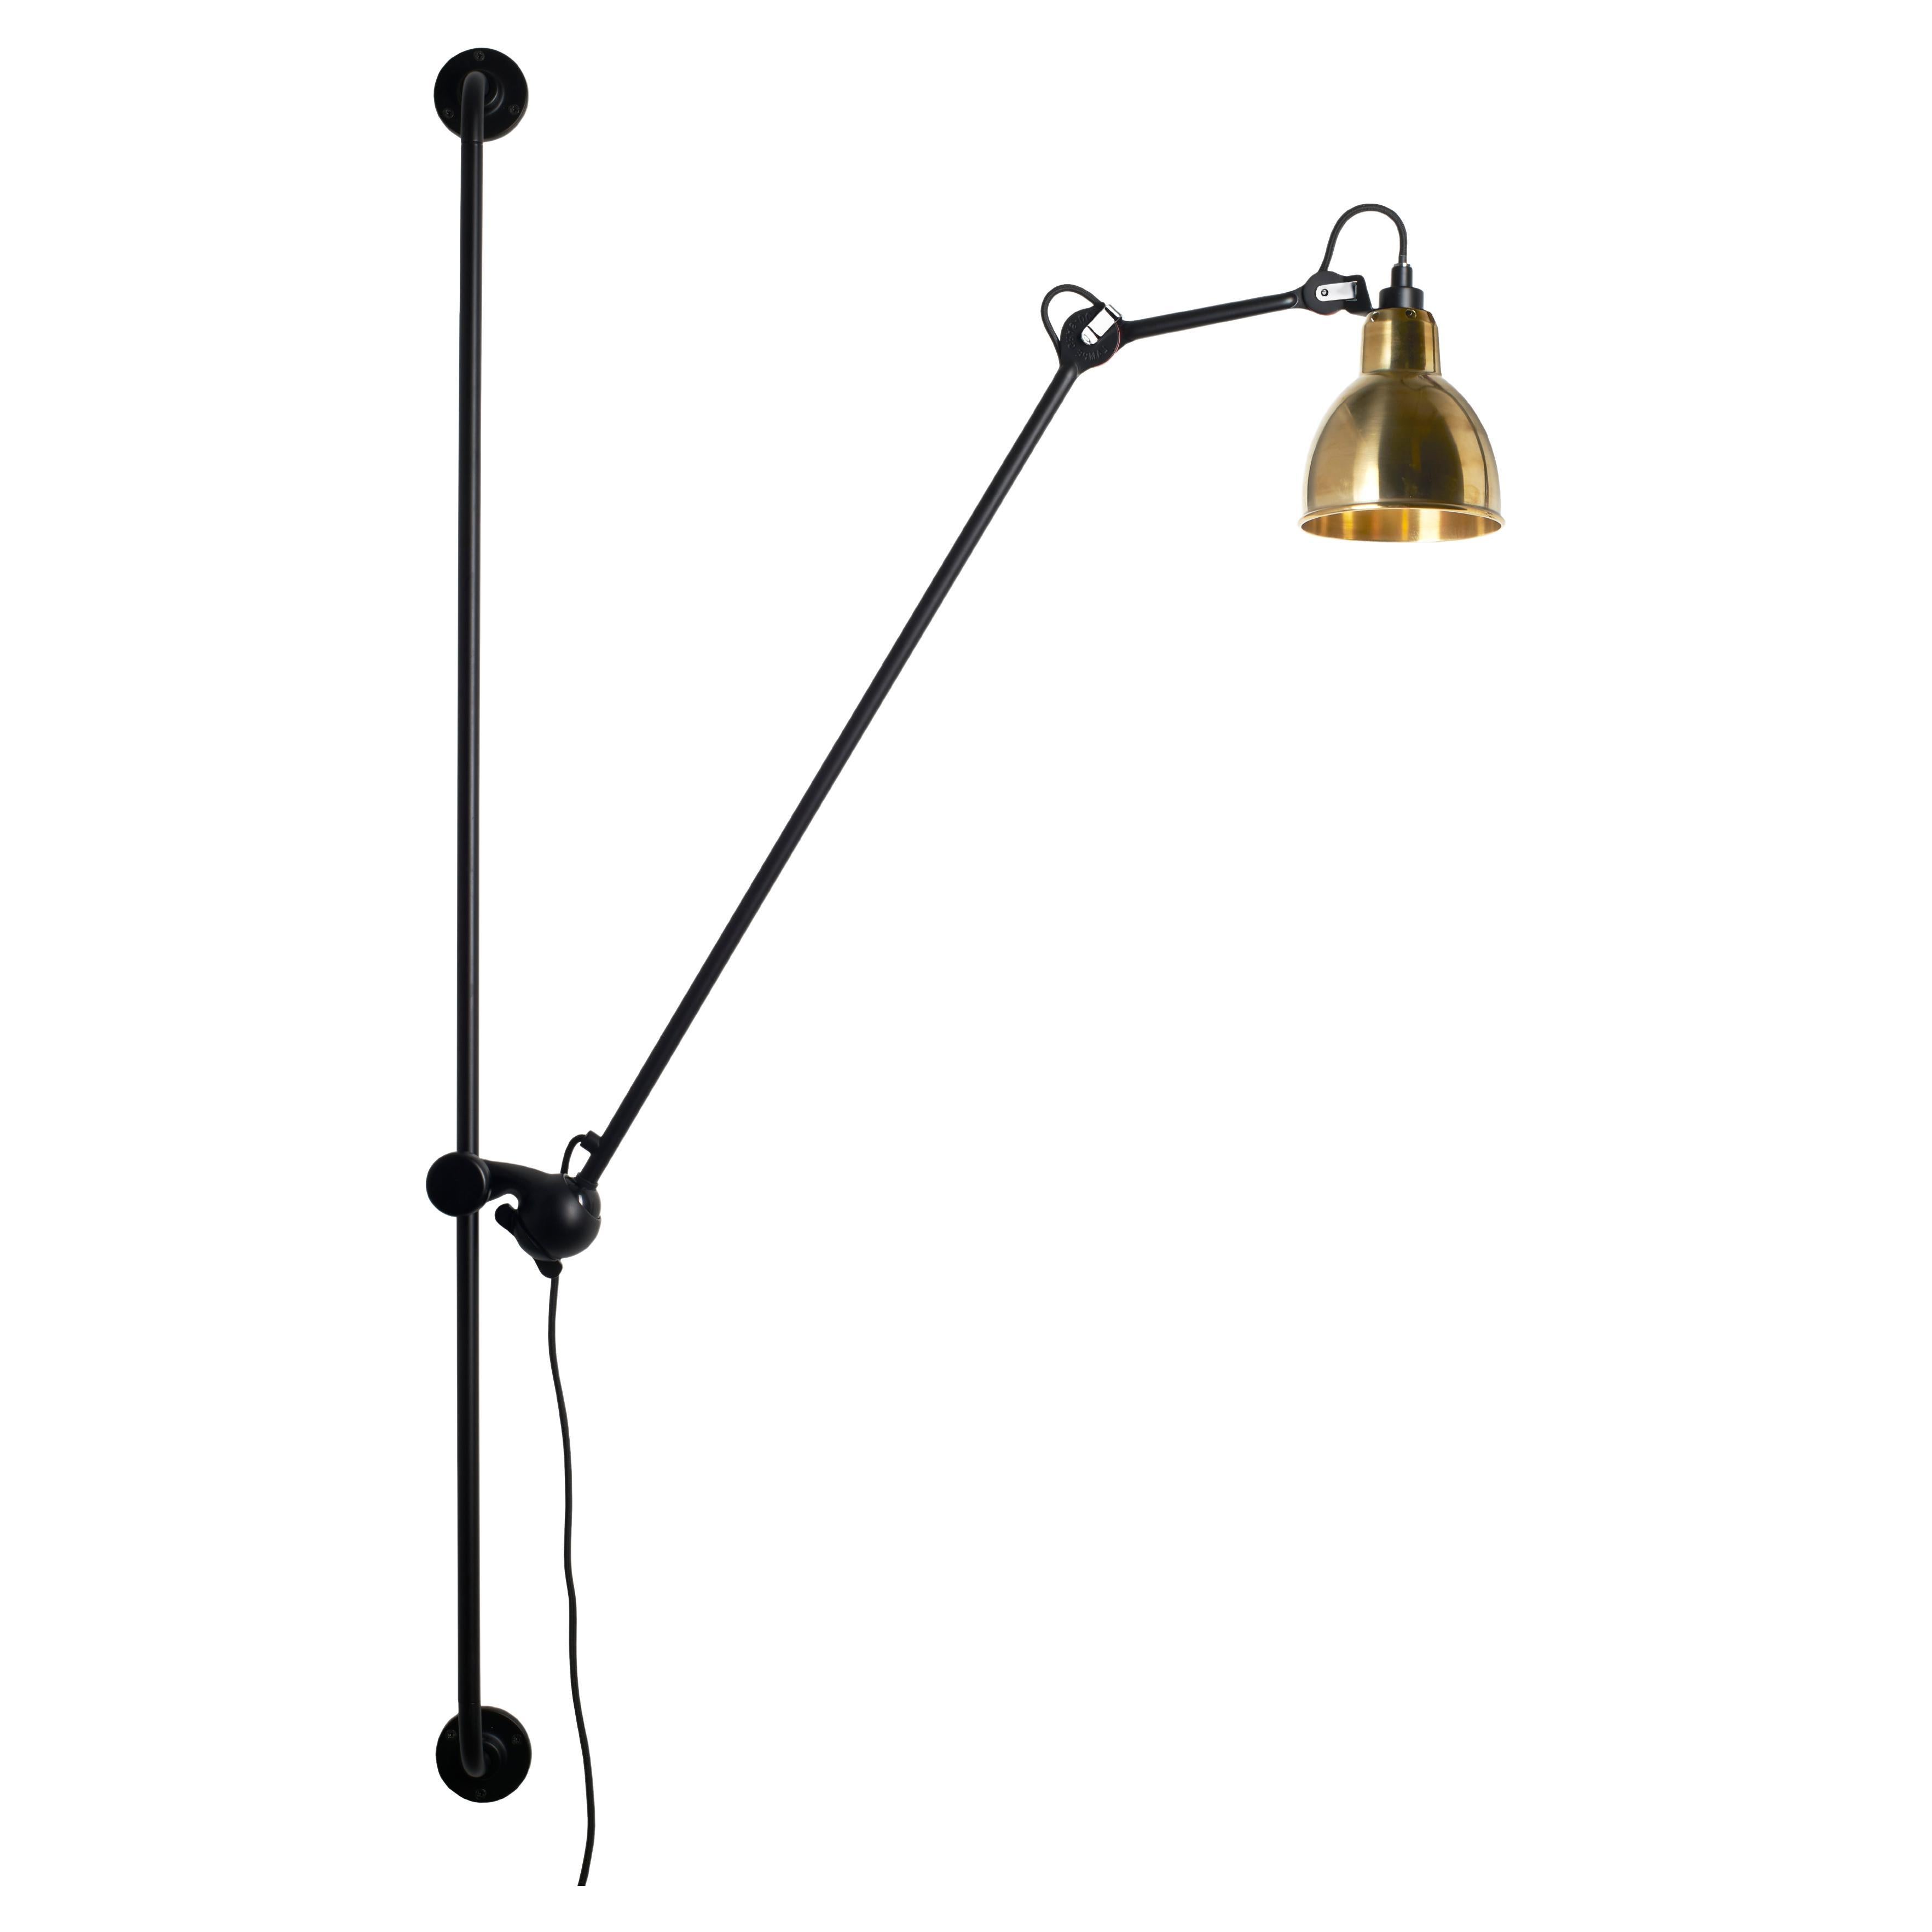 DCW Editions La Lampe Gras N°214 Round Wall Lamp in Black Arm and Brass Shade For Sale